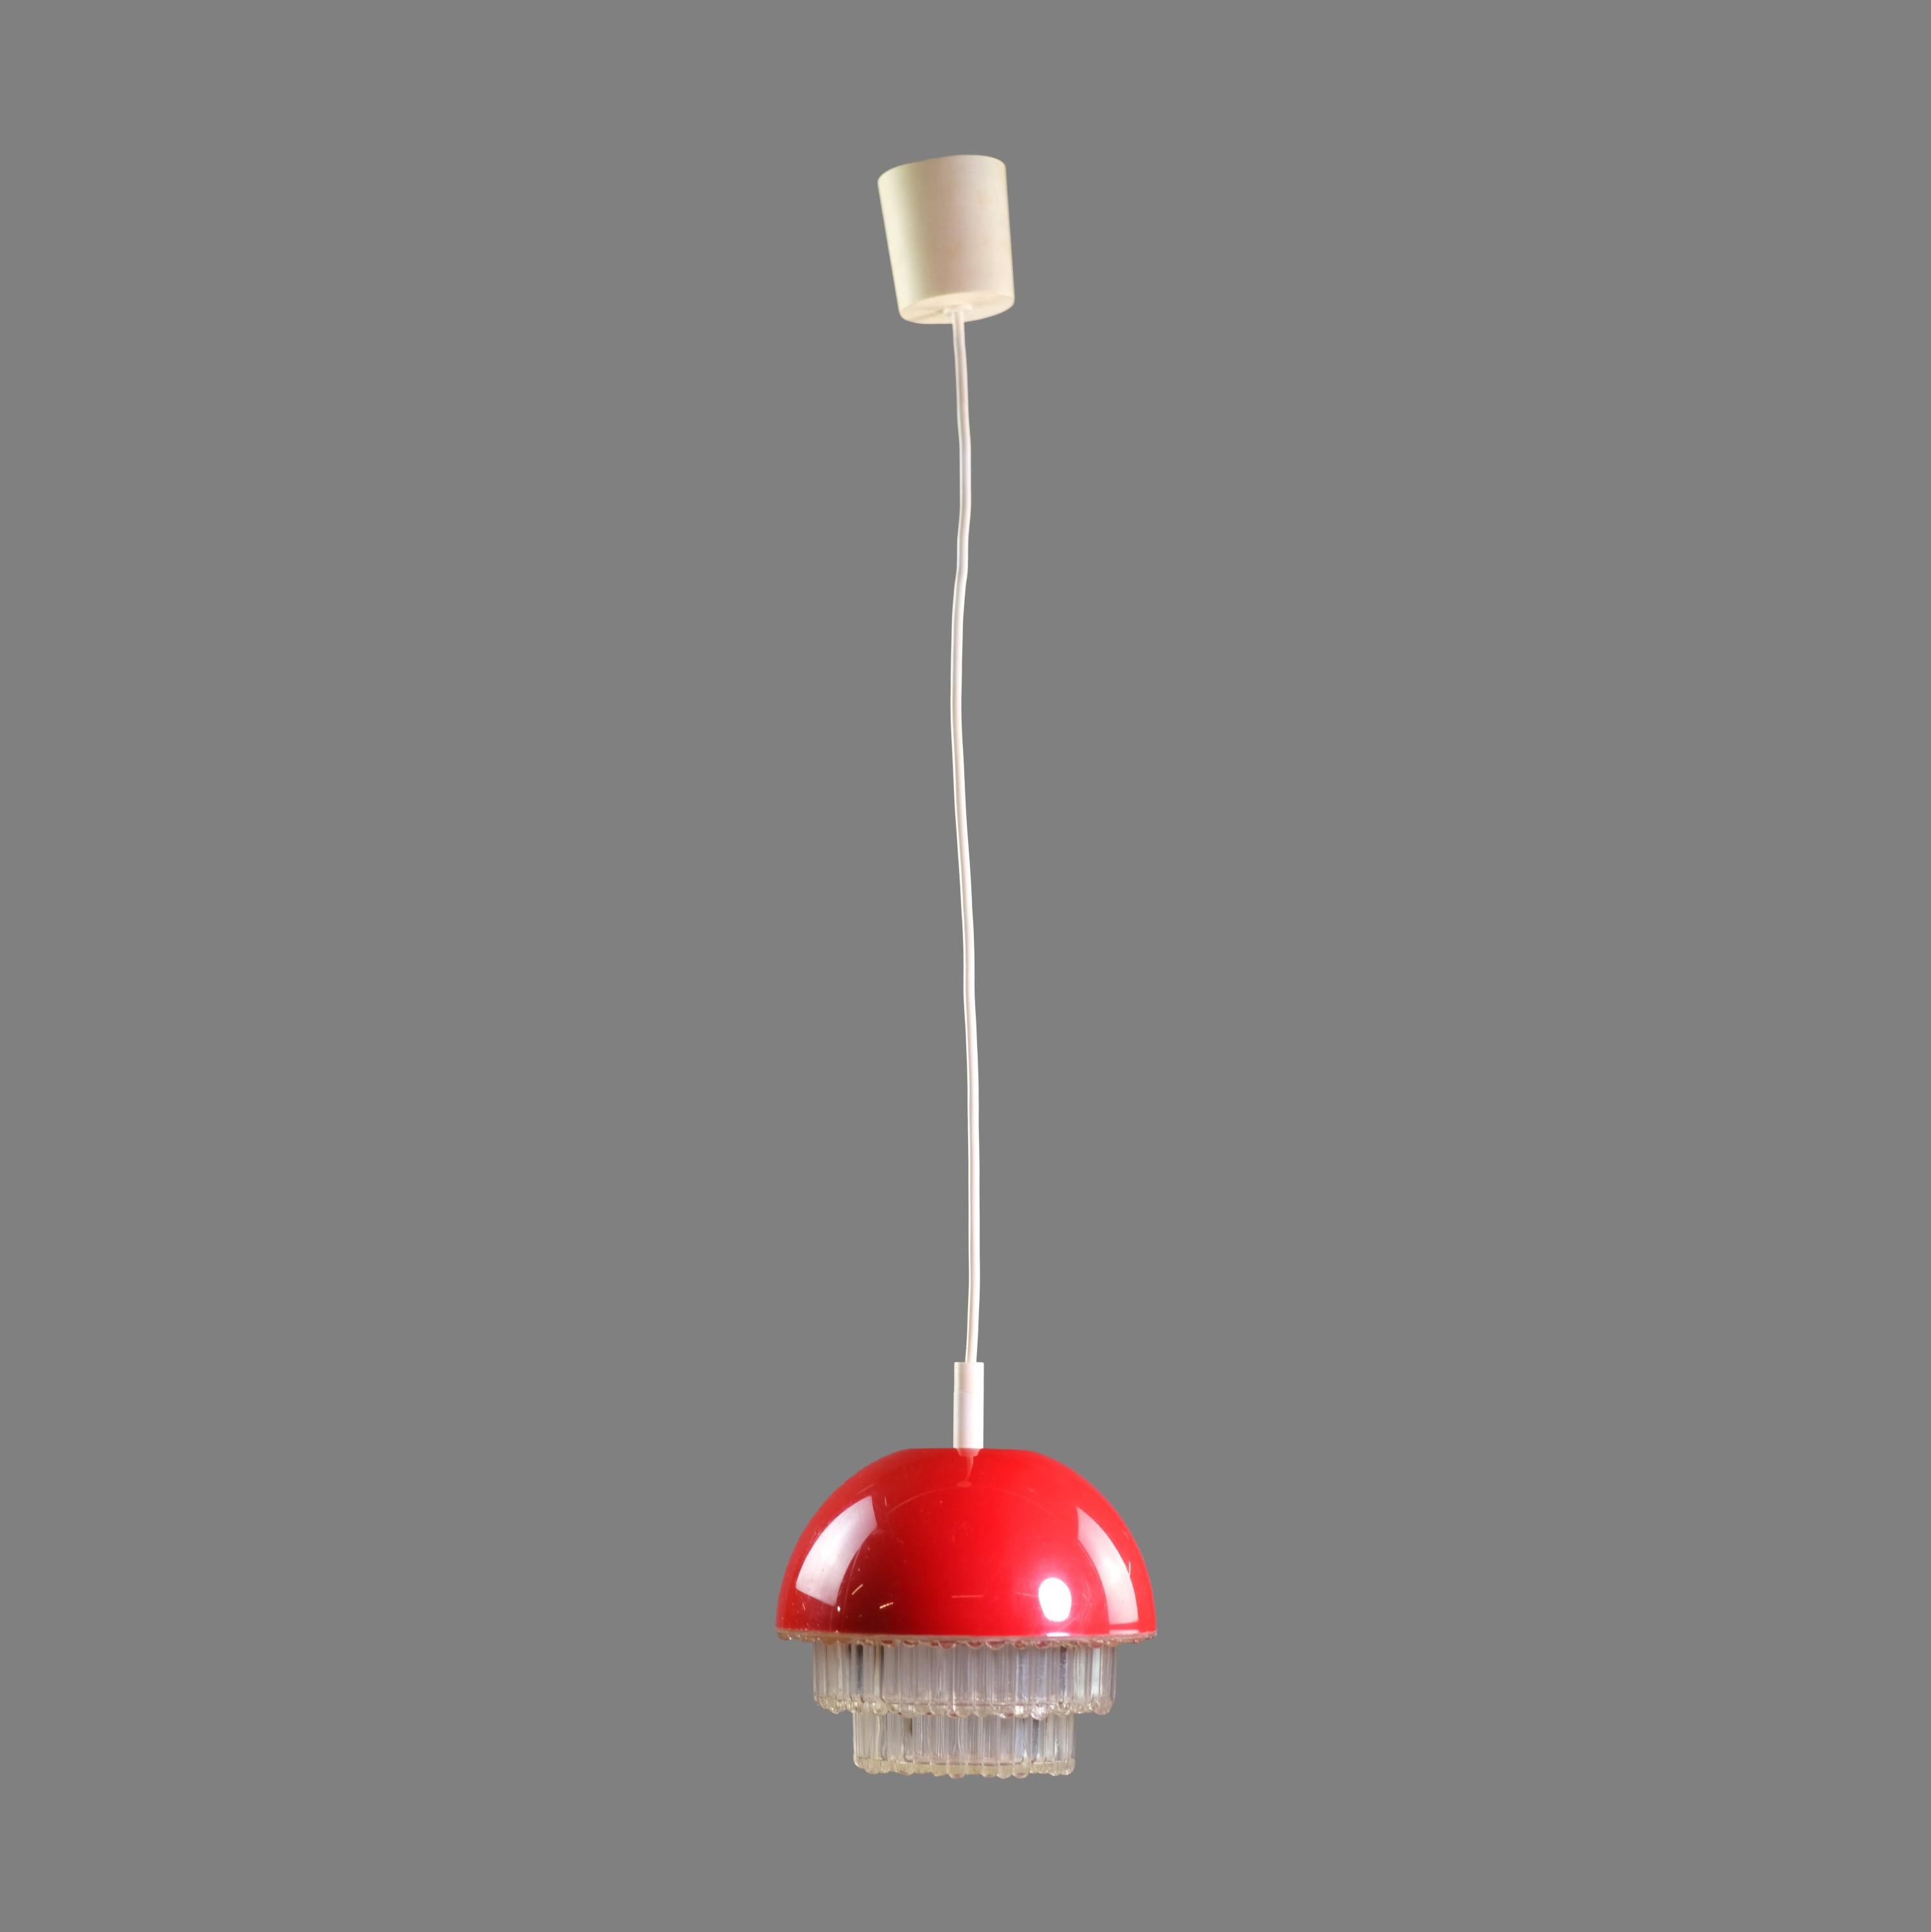 European, possibly Italian, red and clear Lucite pendant light. Features clear Fresnel bottom shade to disperse light. White cable and canopy. Small quantity available at time of posting. Priced each. Please inquire. Please note, this item is